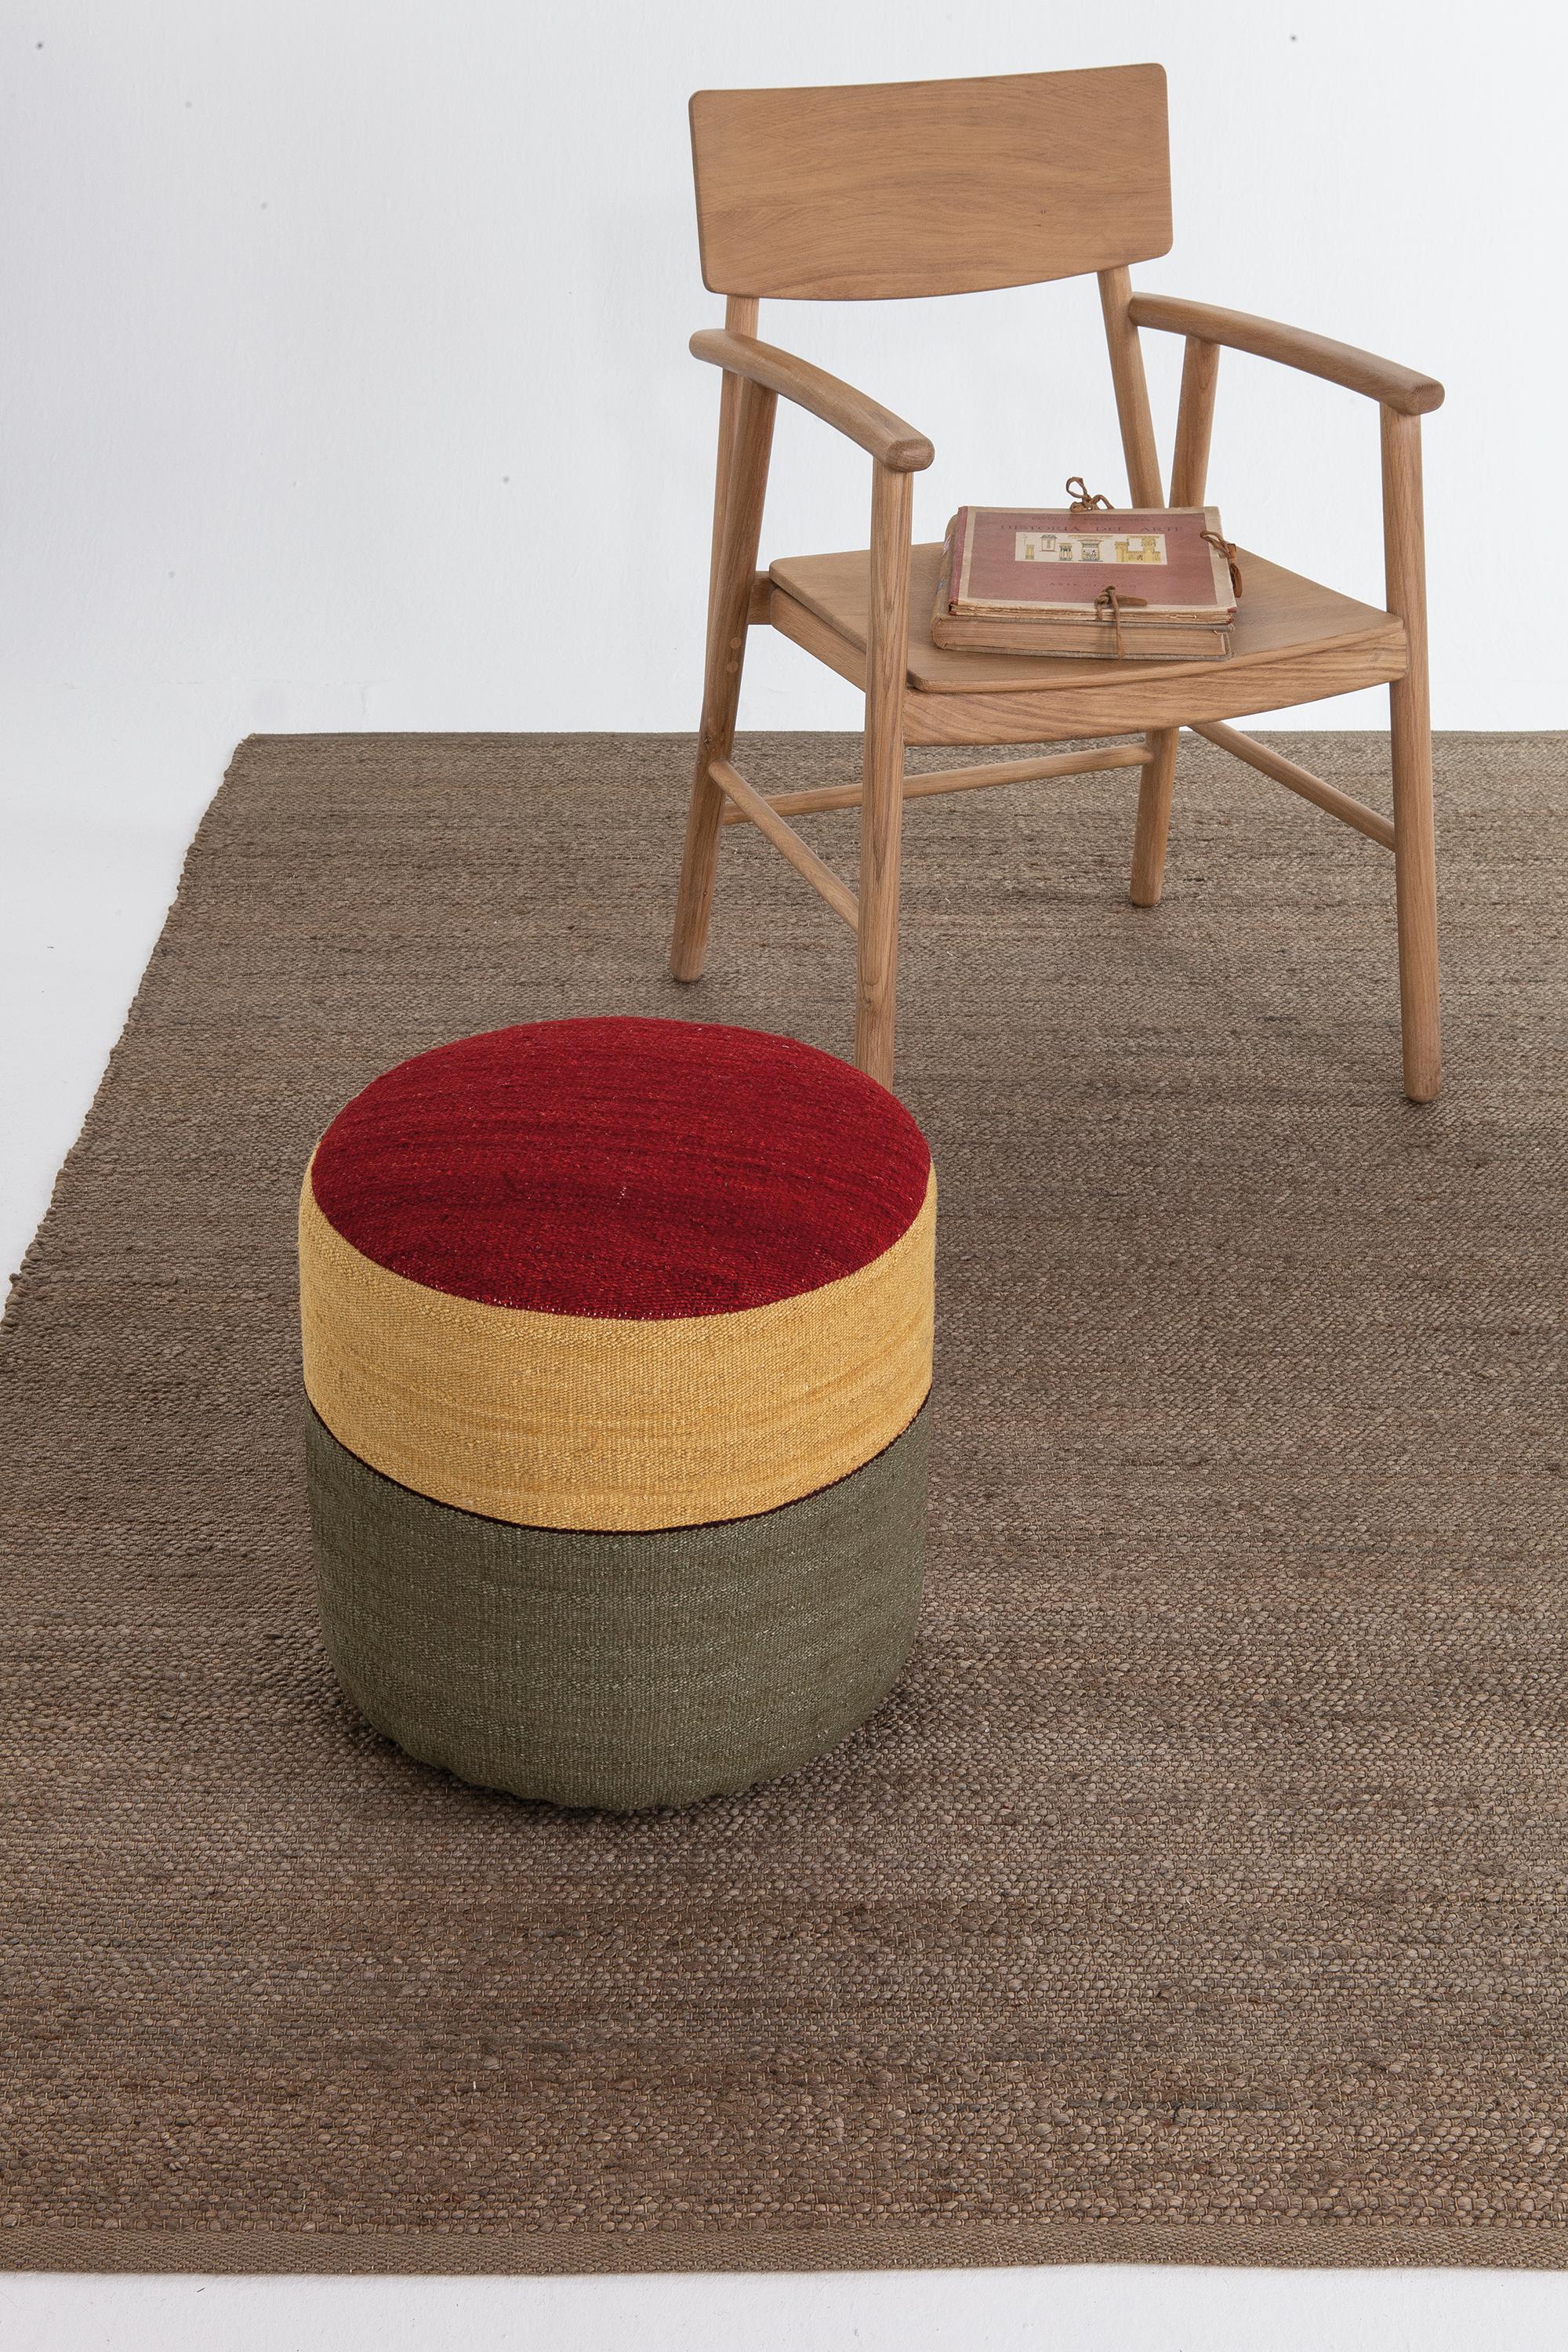 'Kilim 4' Pouf by Nani Marquina and Marcos Catalán for Nanimarquina.

Executed in 100% hand-spun Afghan wool with a birch base and flame-retardant filling, this decorative accessory is the perfect way to add a touch of color to any room in the